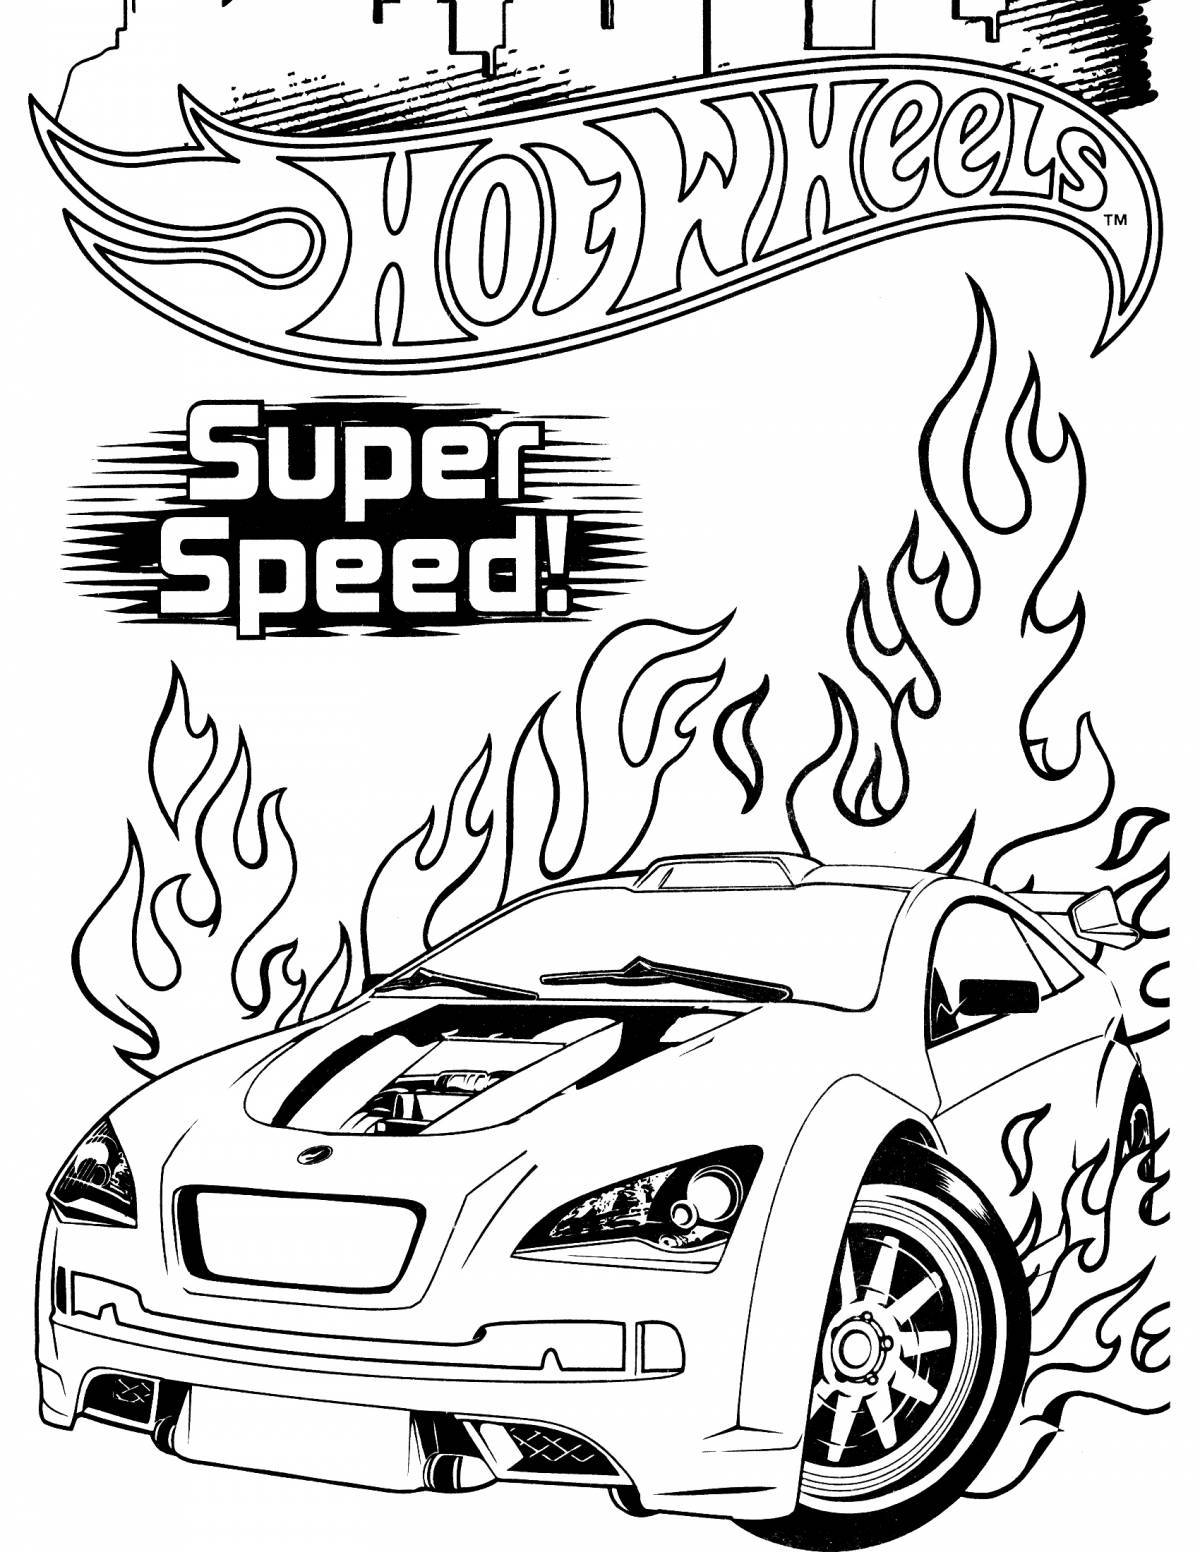 Incredible hot wheels coloring book for kids